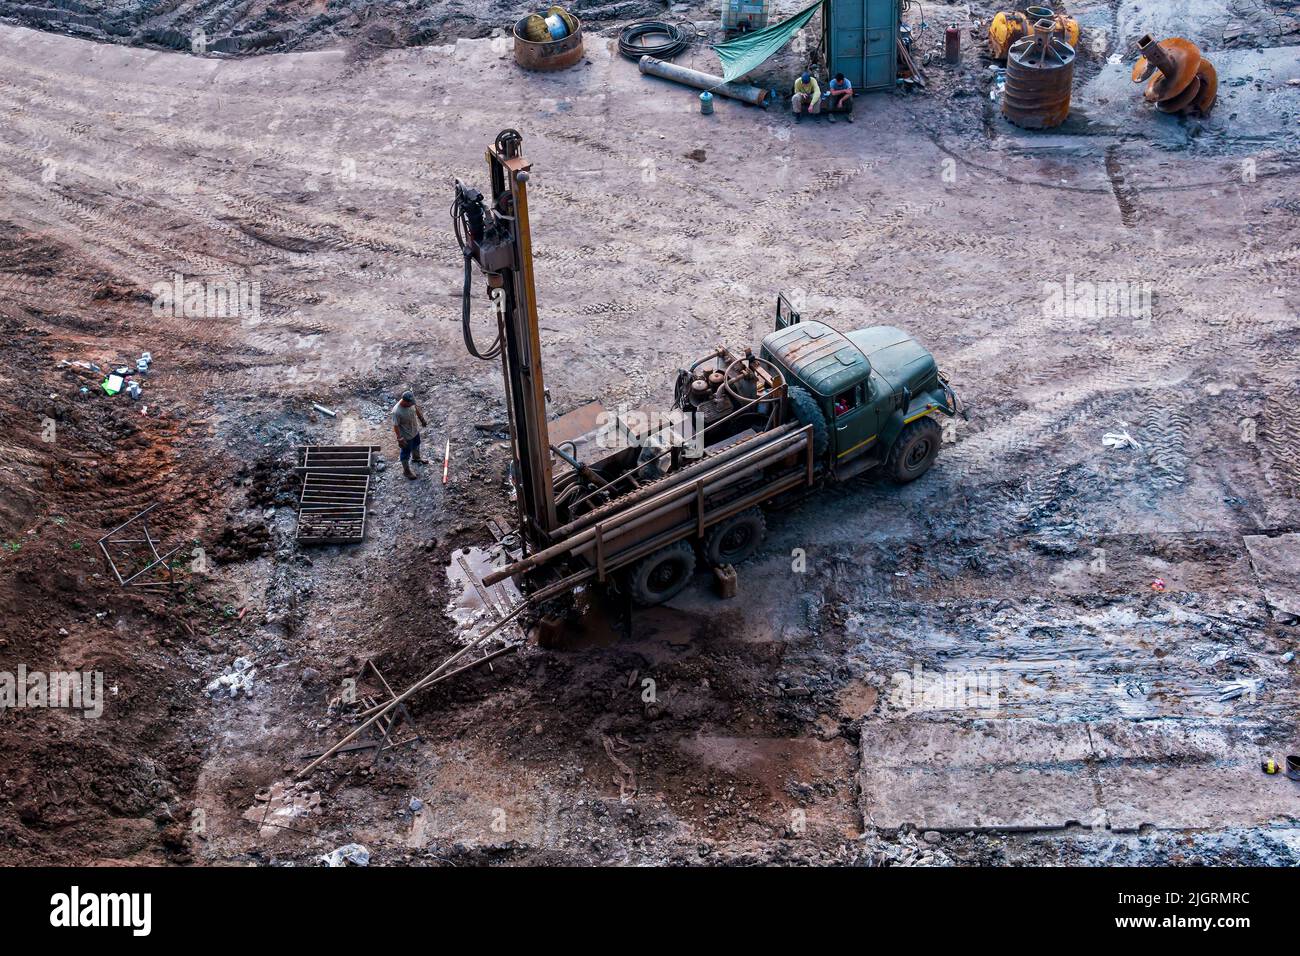 Perm, Russia - July 08, 2022: mobile drilling rig mounted on a truck during operation, top view Stock Photo